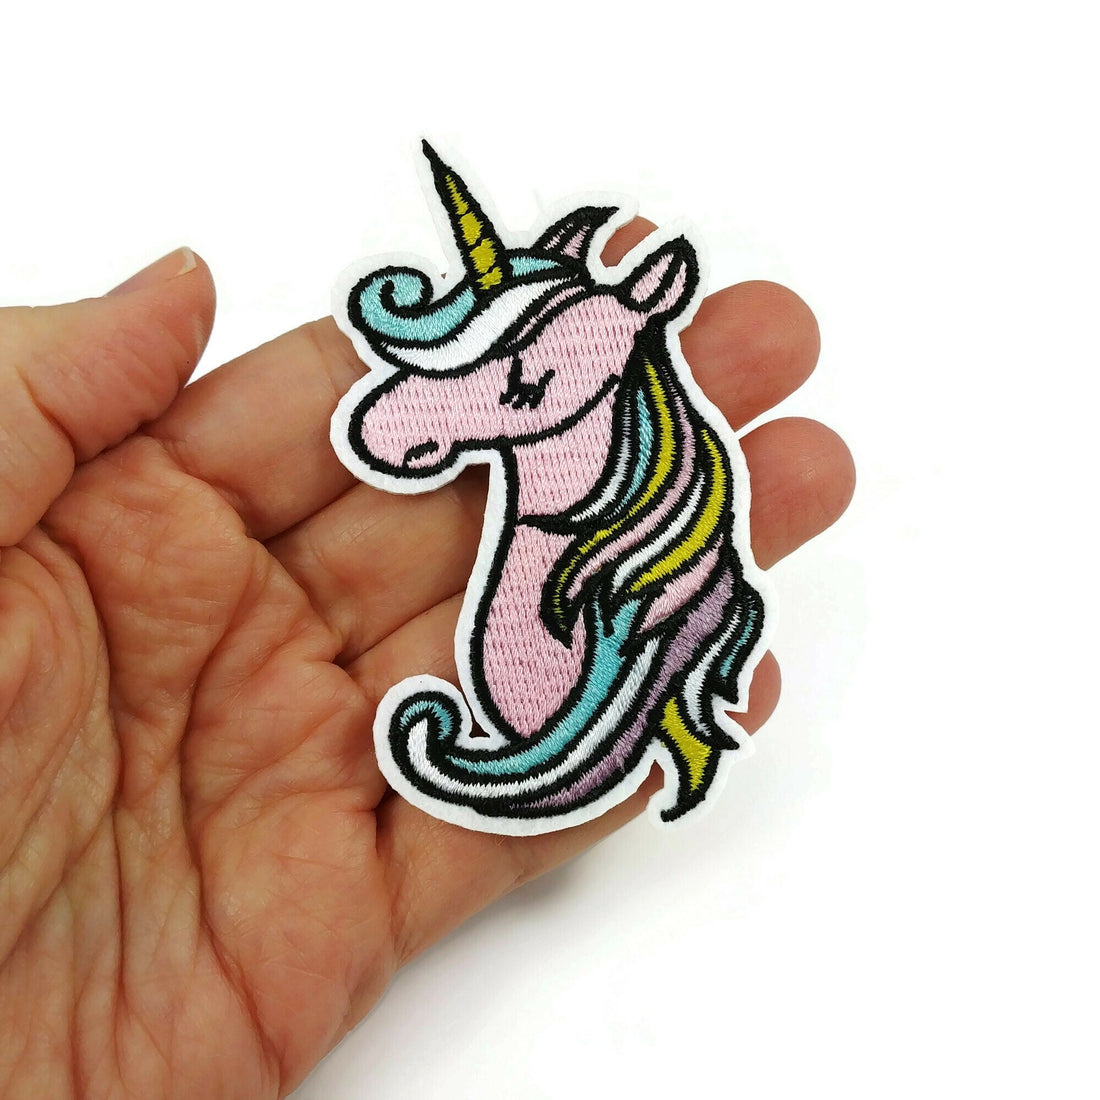 Unicorn iron on patch, embroidered patch, sew on patch, Cute pastel unicorn patch